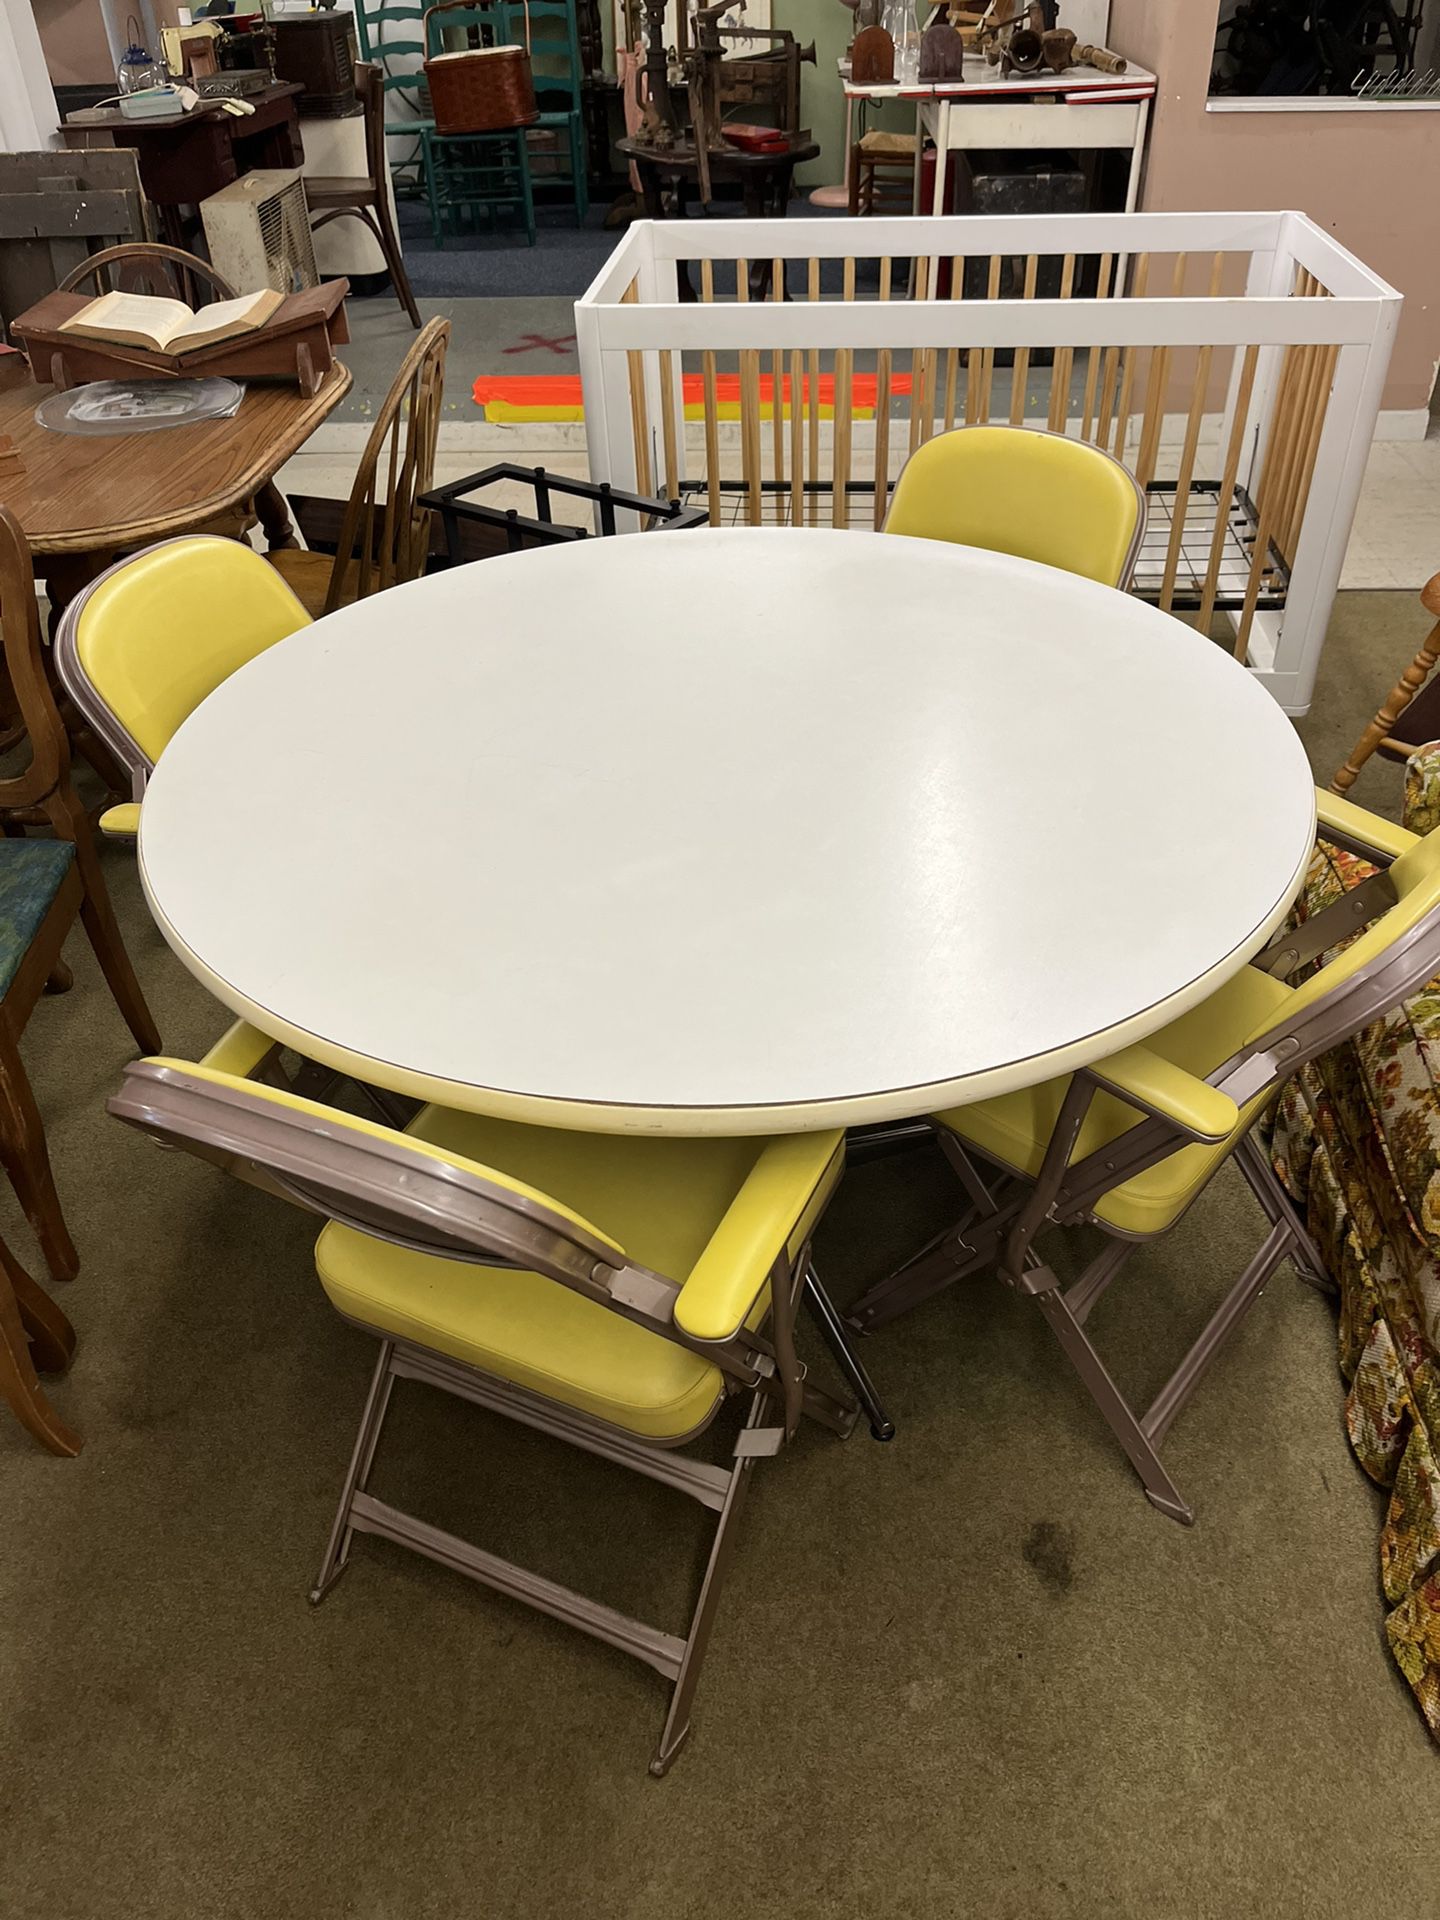 Vintage Circular Table With Folding Chairs